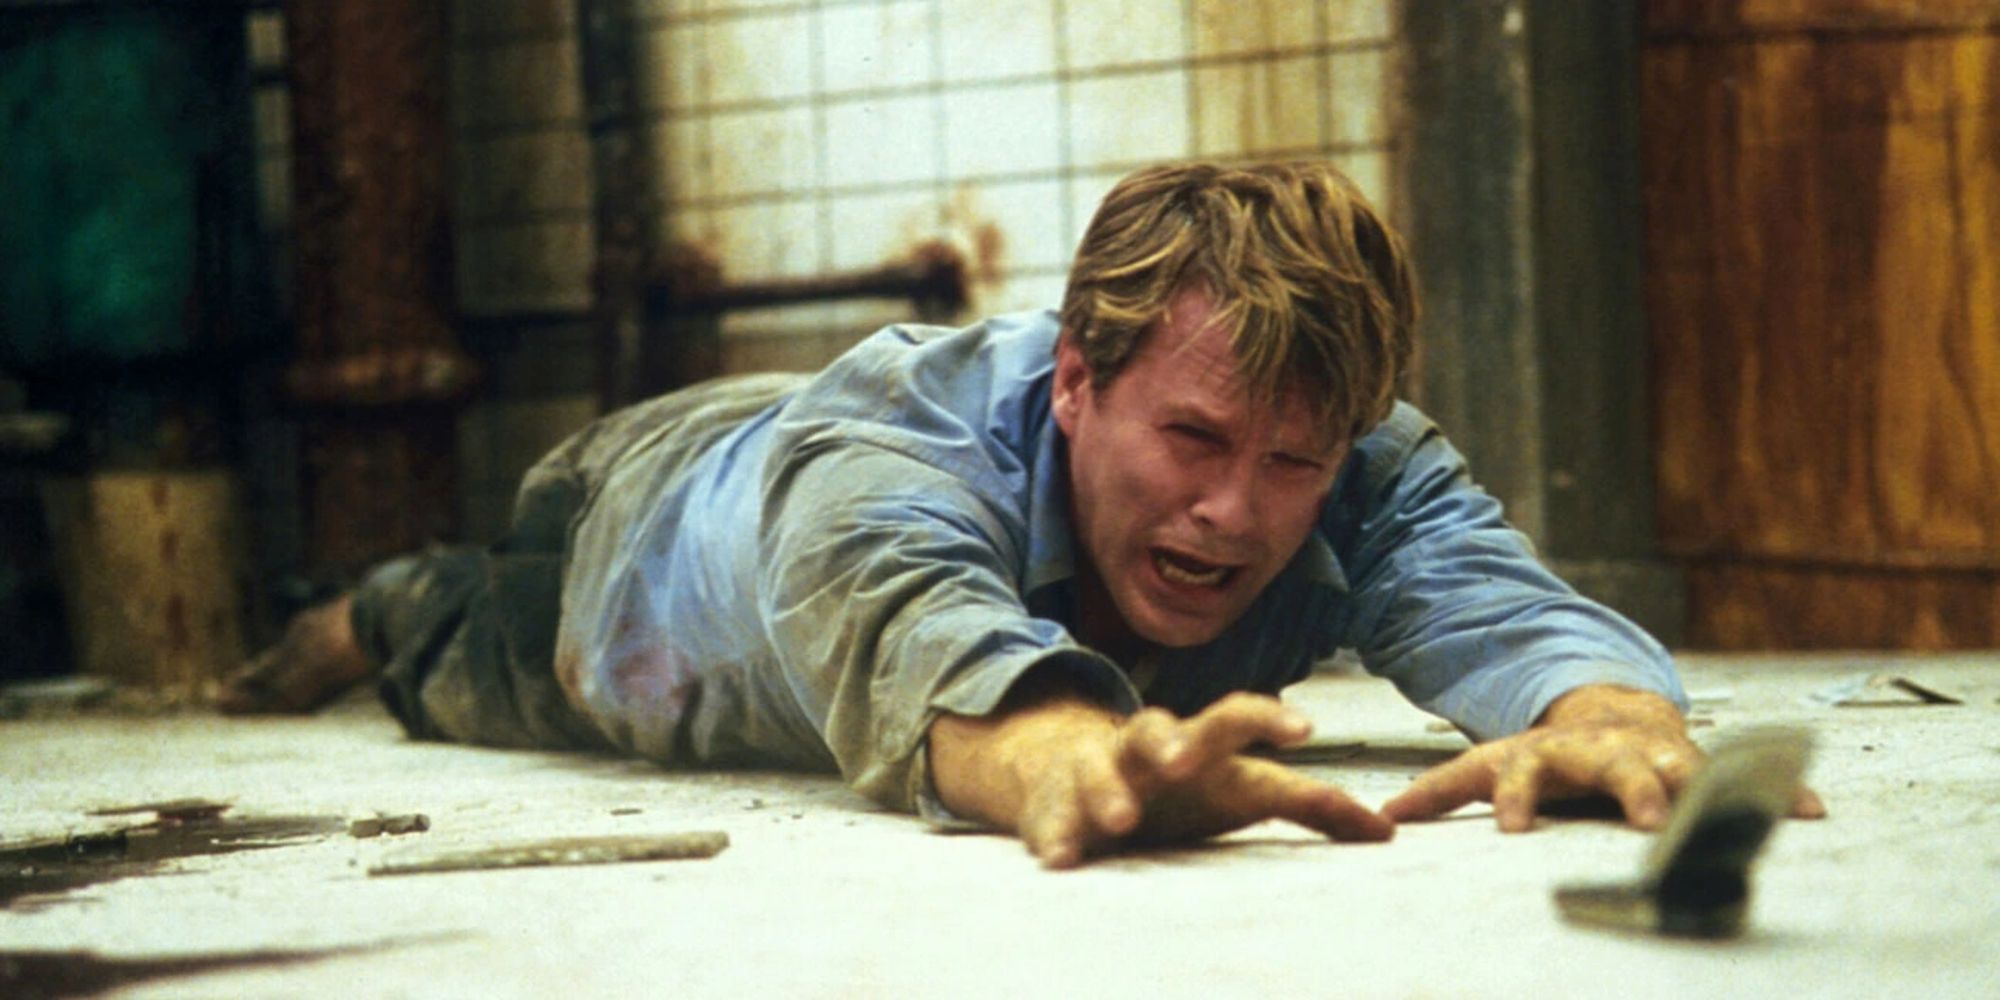 Cary Elwes laying on the floor in distress, reaching for a phone in 'Saw' (2004)